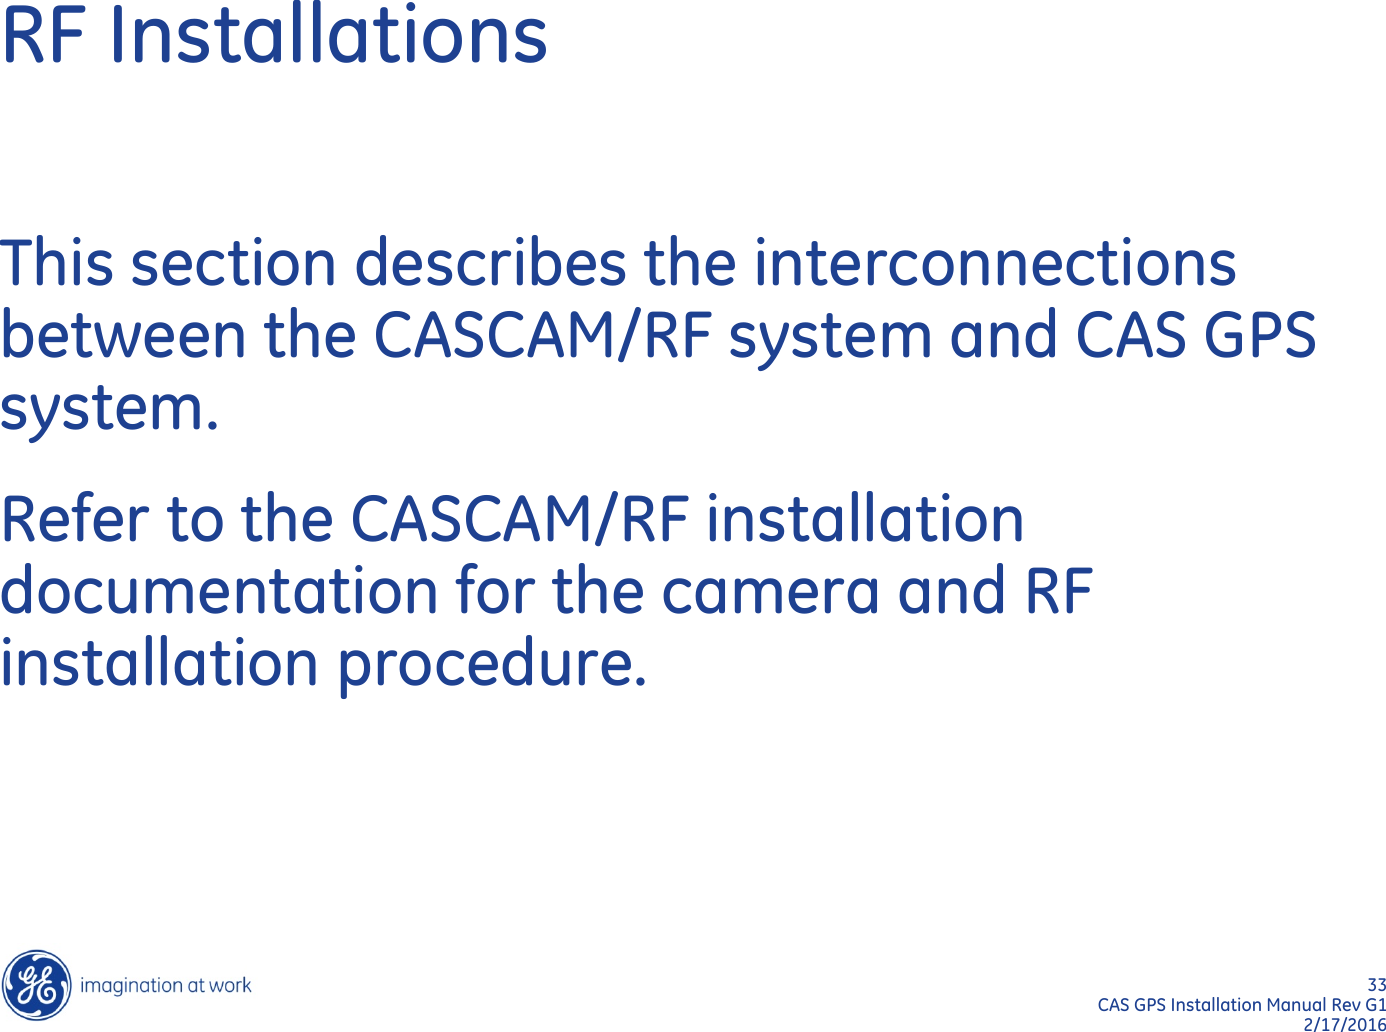 33  CAS GPS Installation Manual Rev G1 2/17/2016 RF Installations This section describes the interconnections between the CASCAM/RF system and CAS GPS system. Refer to the CASCAM/RF installation documentation for the camera and RF installation procedure. 